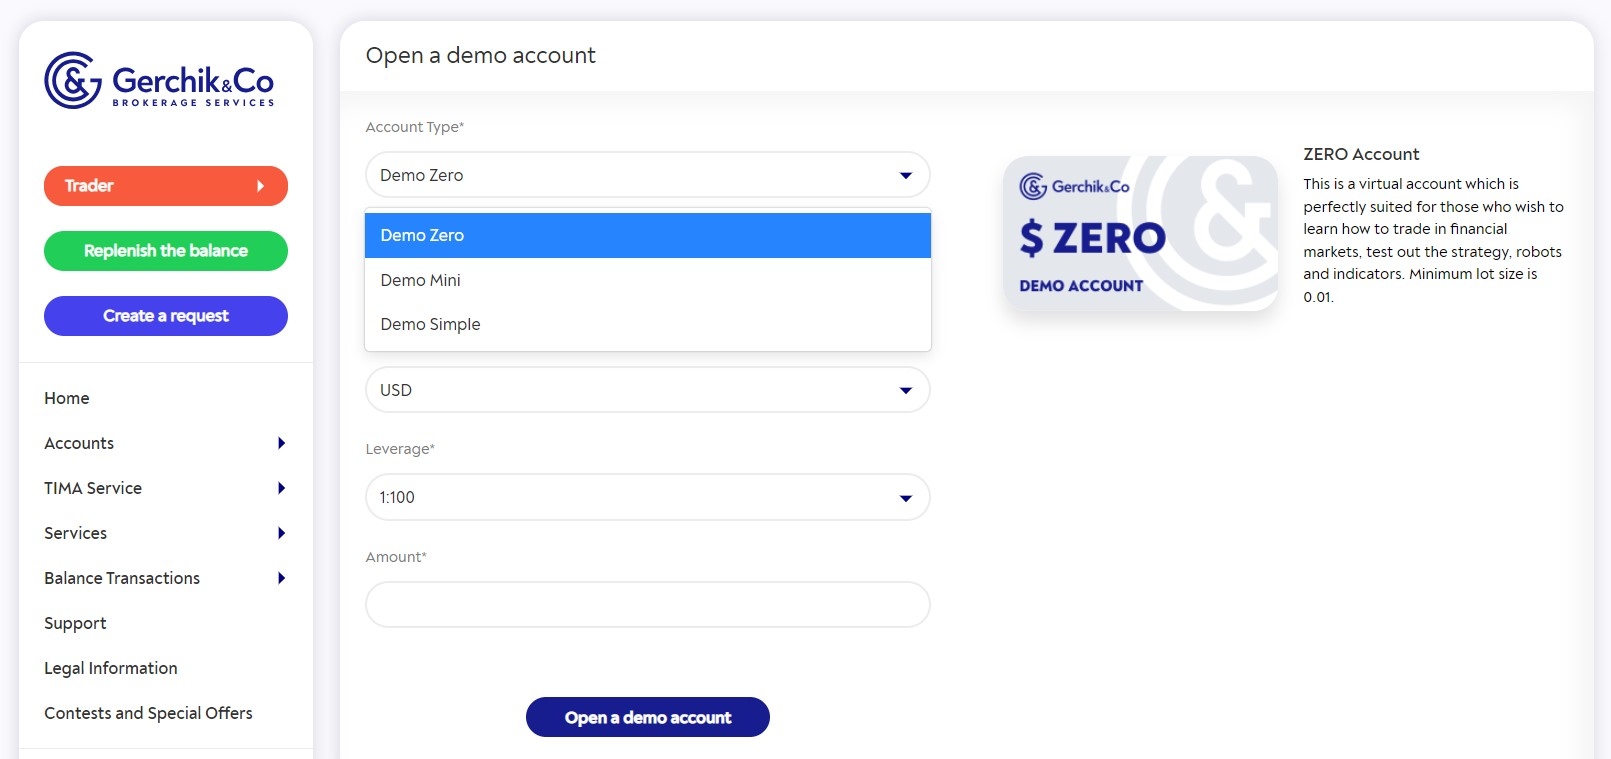 Opening a demo account with Gerchik & Co